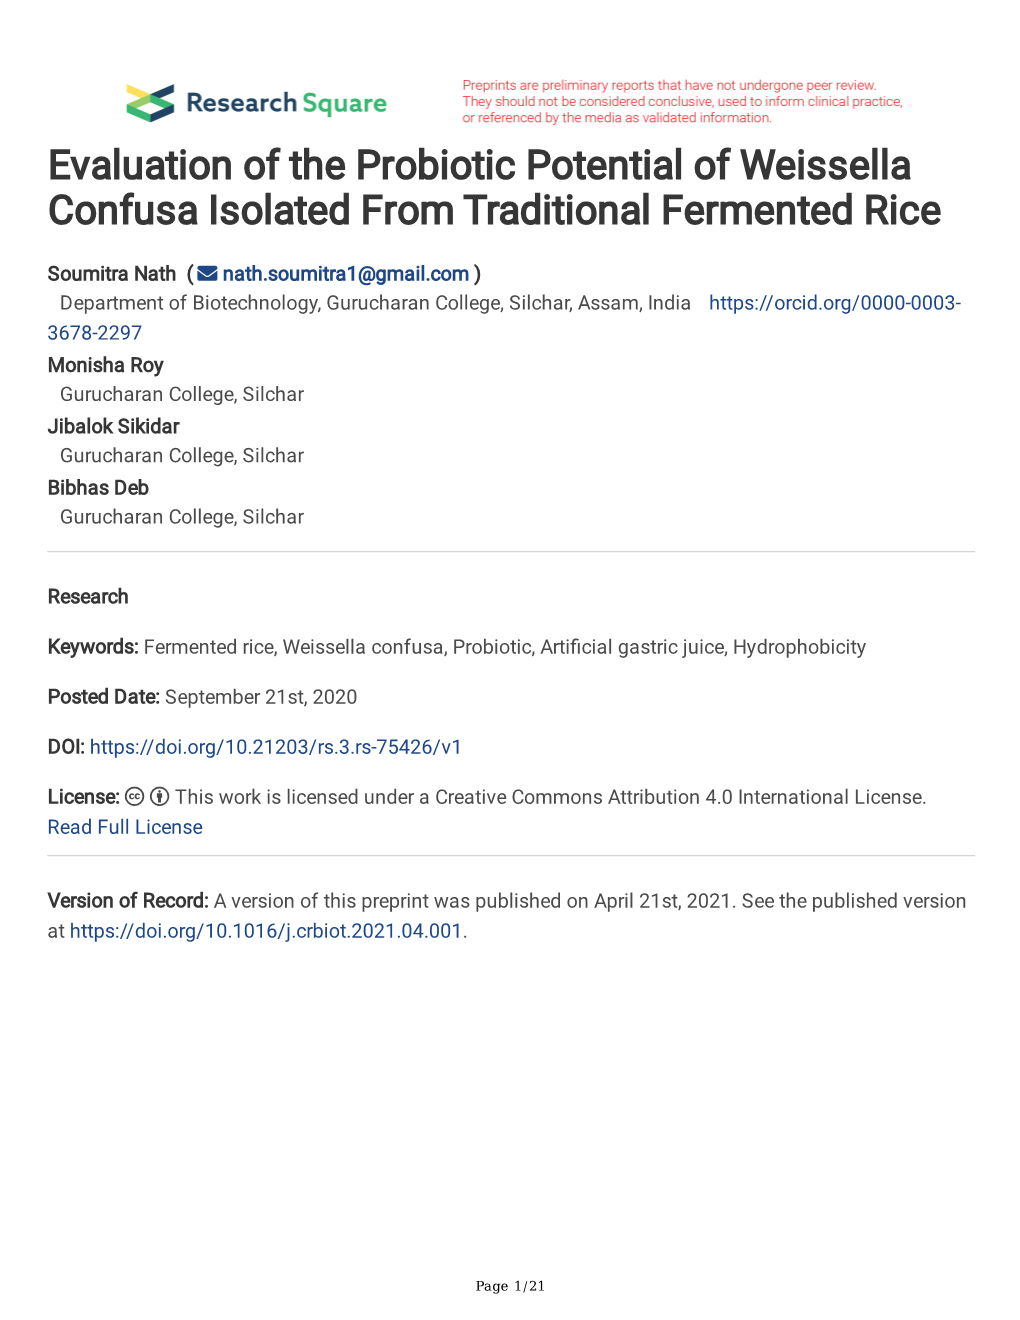 Evaluation of the Probiotic Potential of Weissella Confusa Isolated from Traditional Fermented Rice